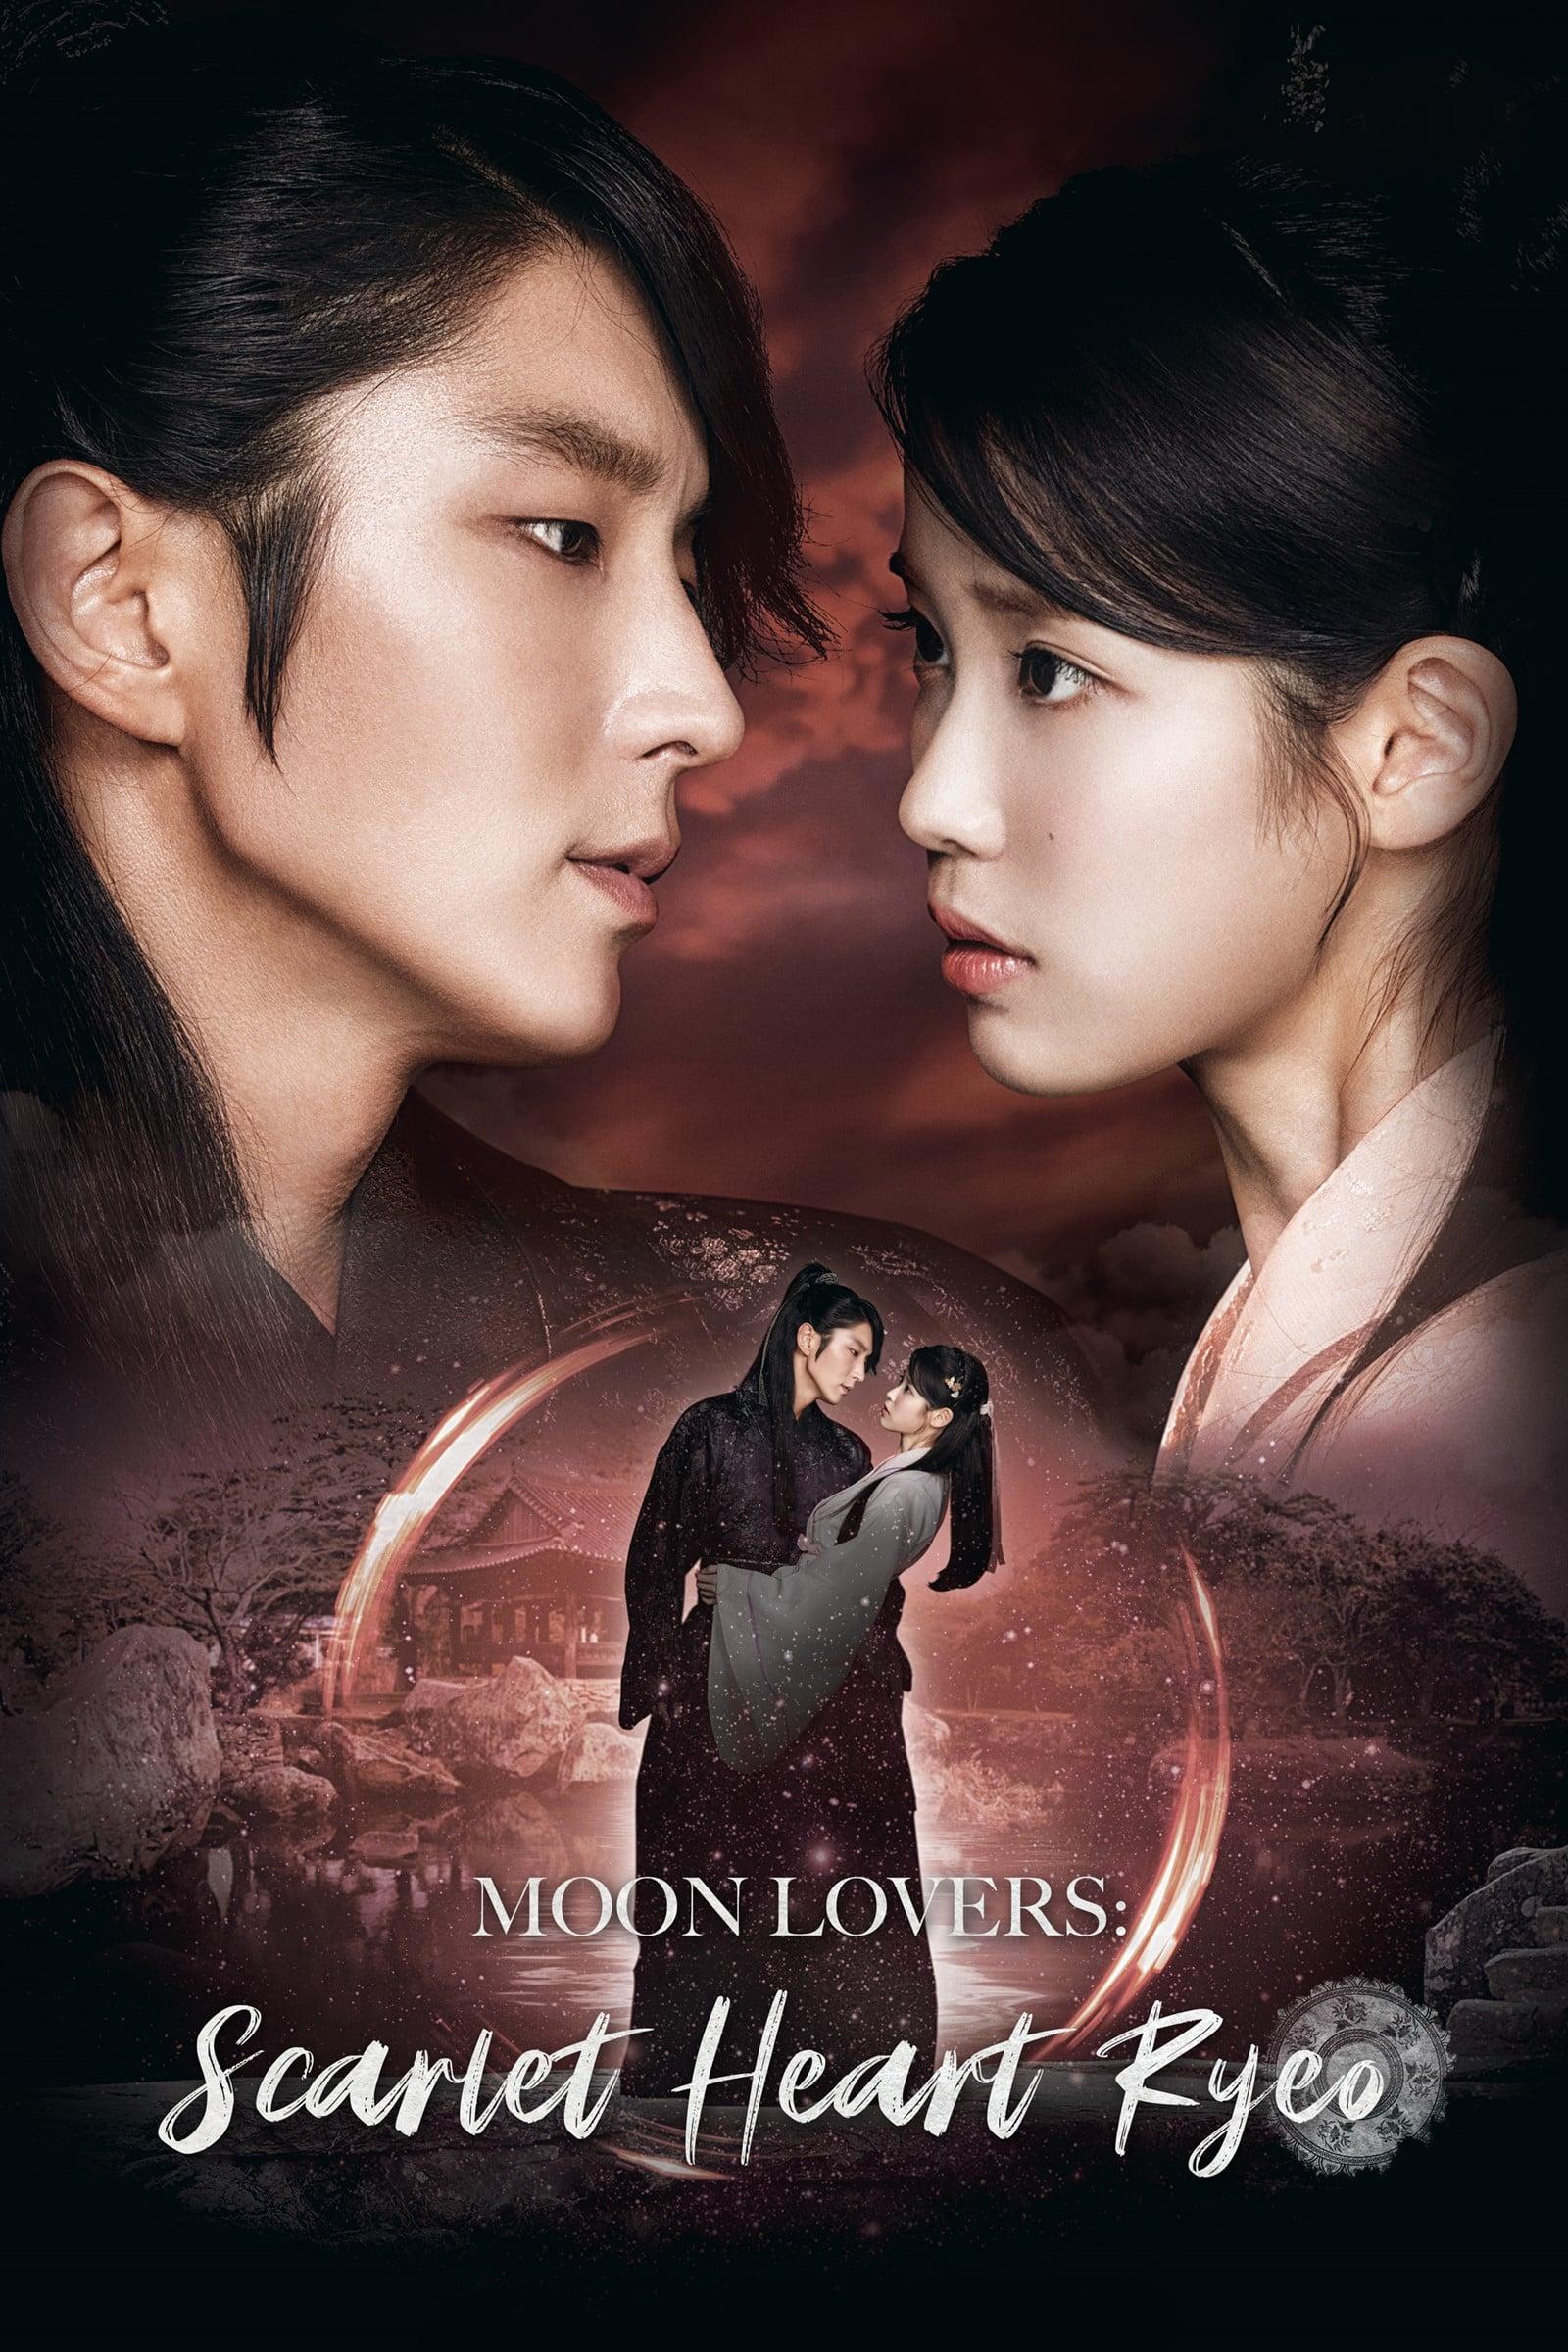 Scarlet Heart: Ryeo poster